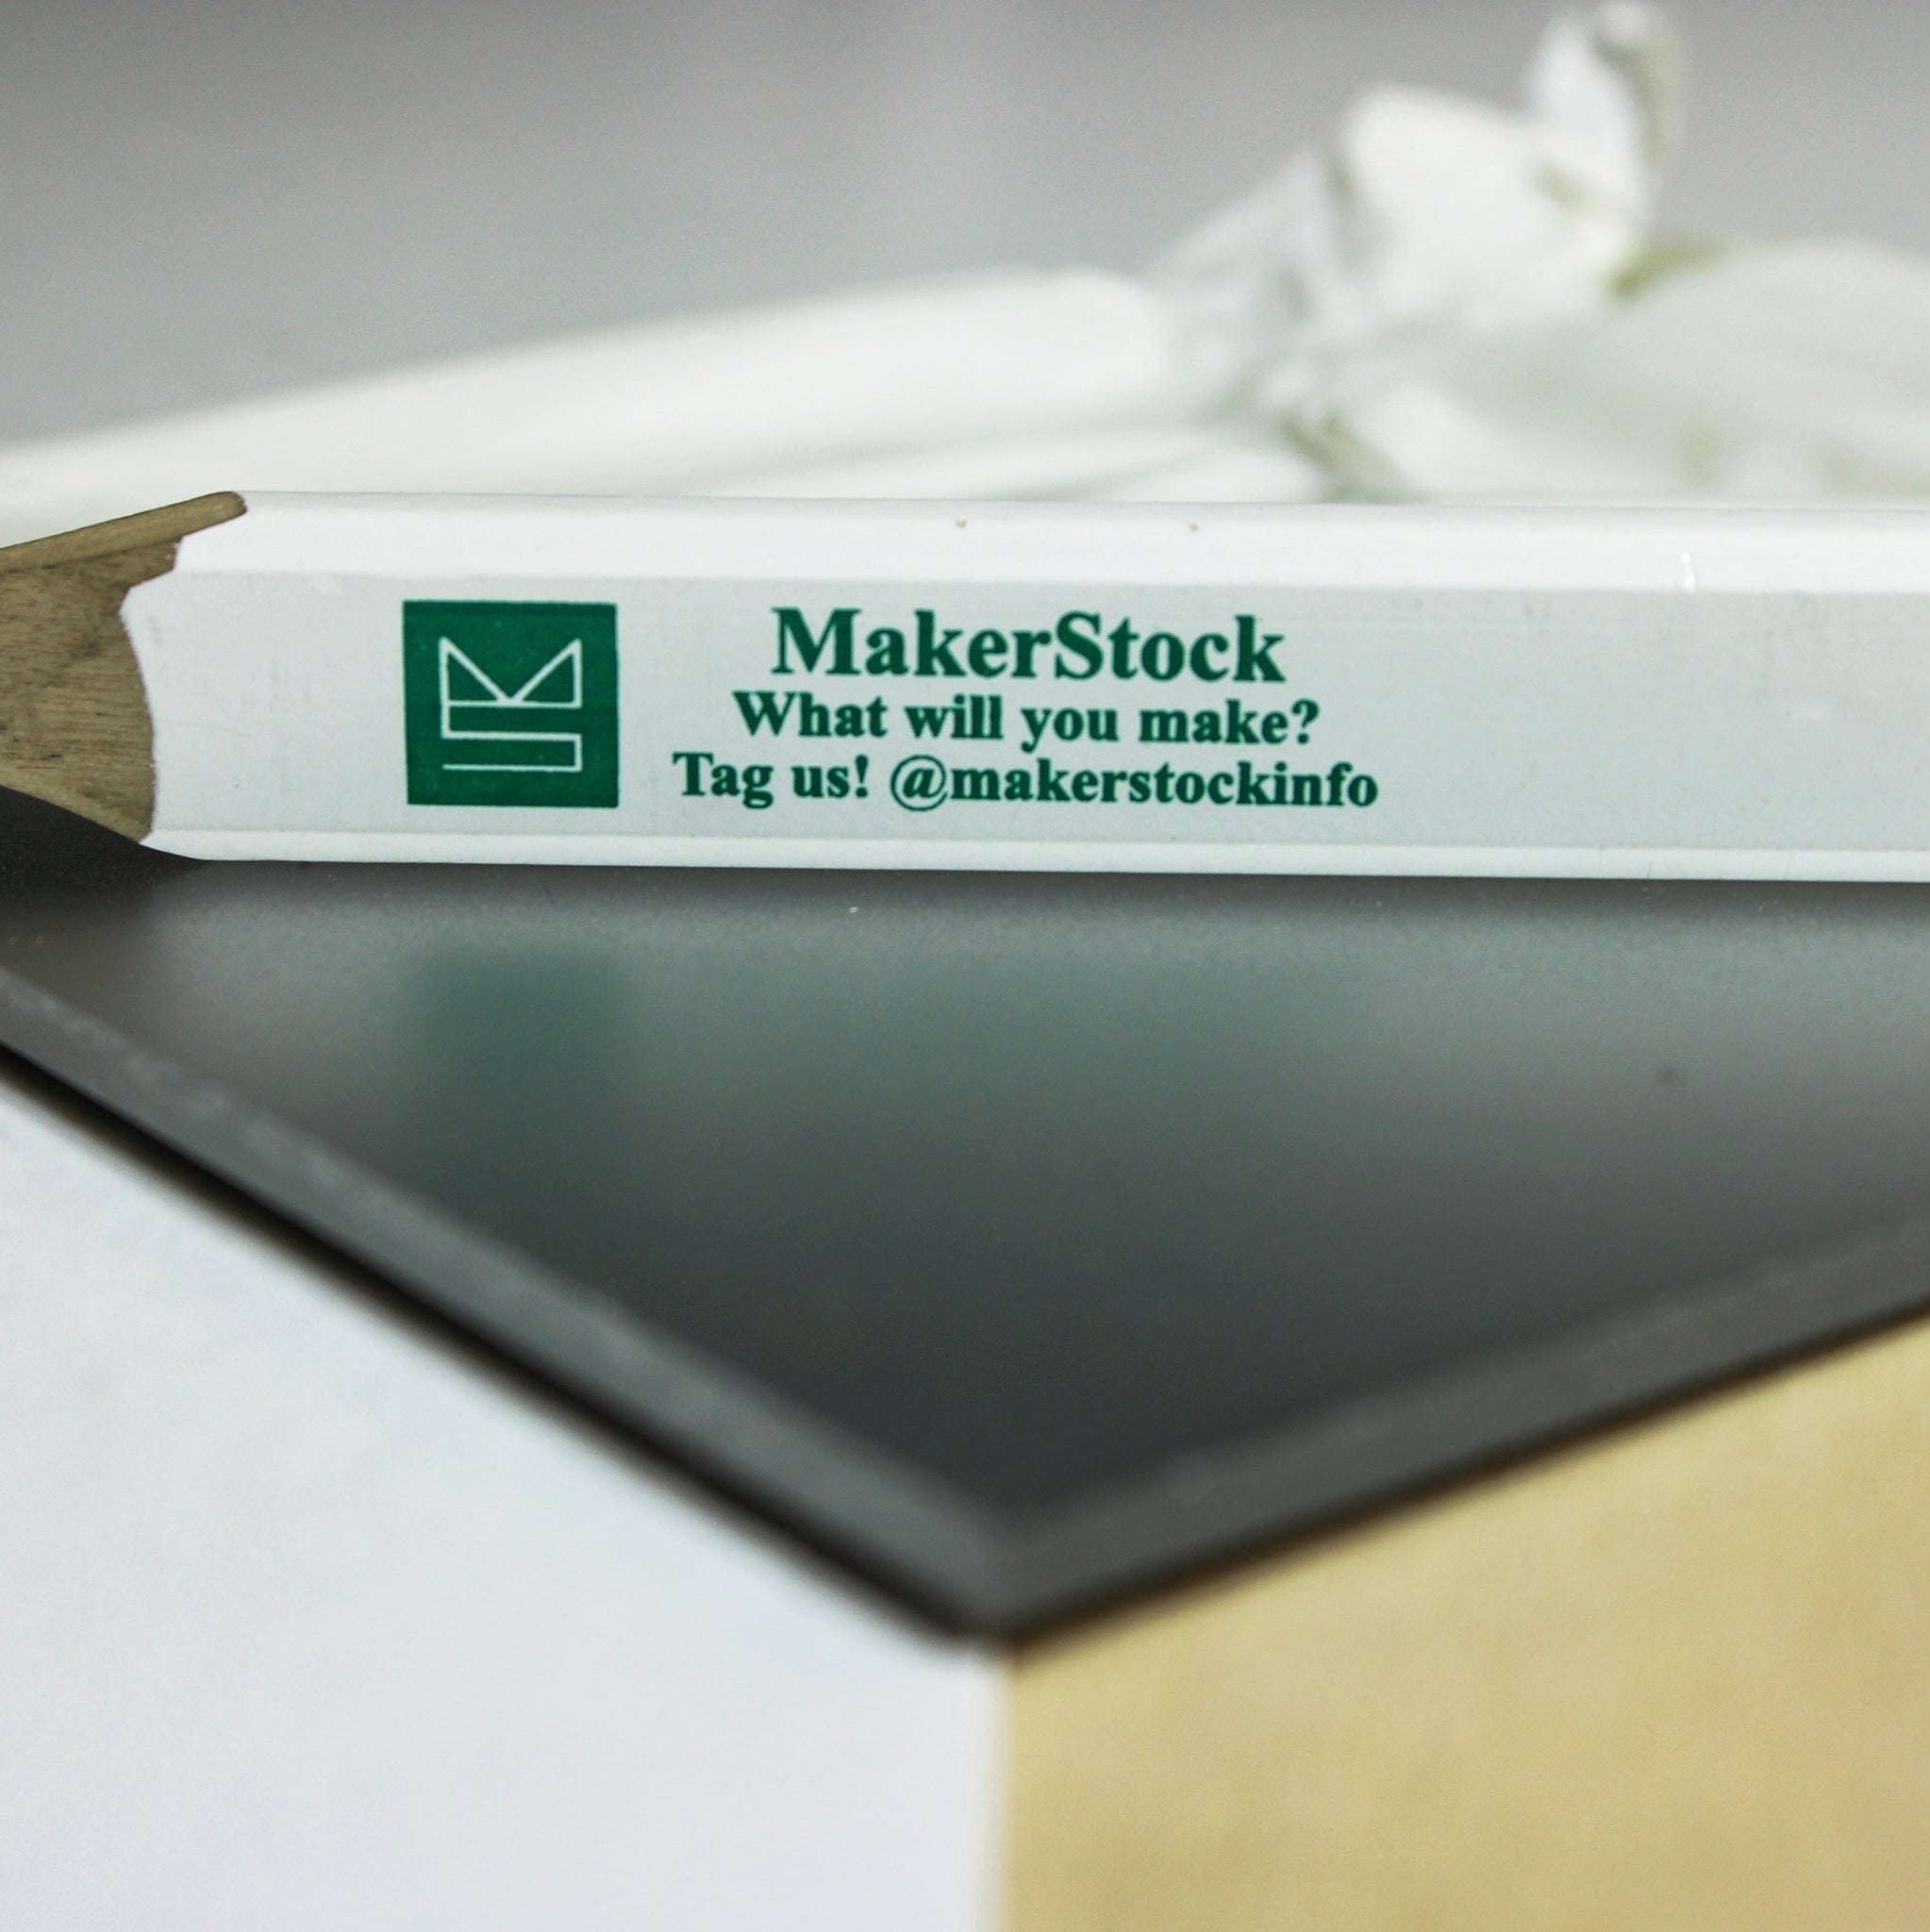 Mirrored Acrylic for Laser Cutting – MakerStock